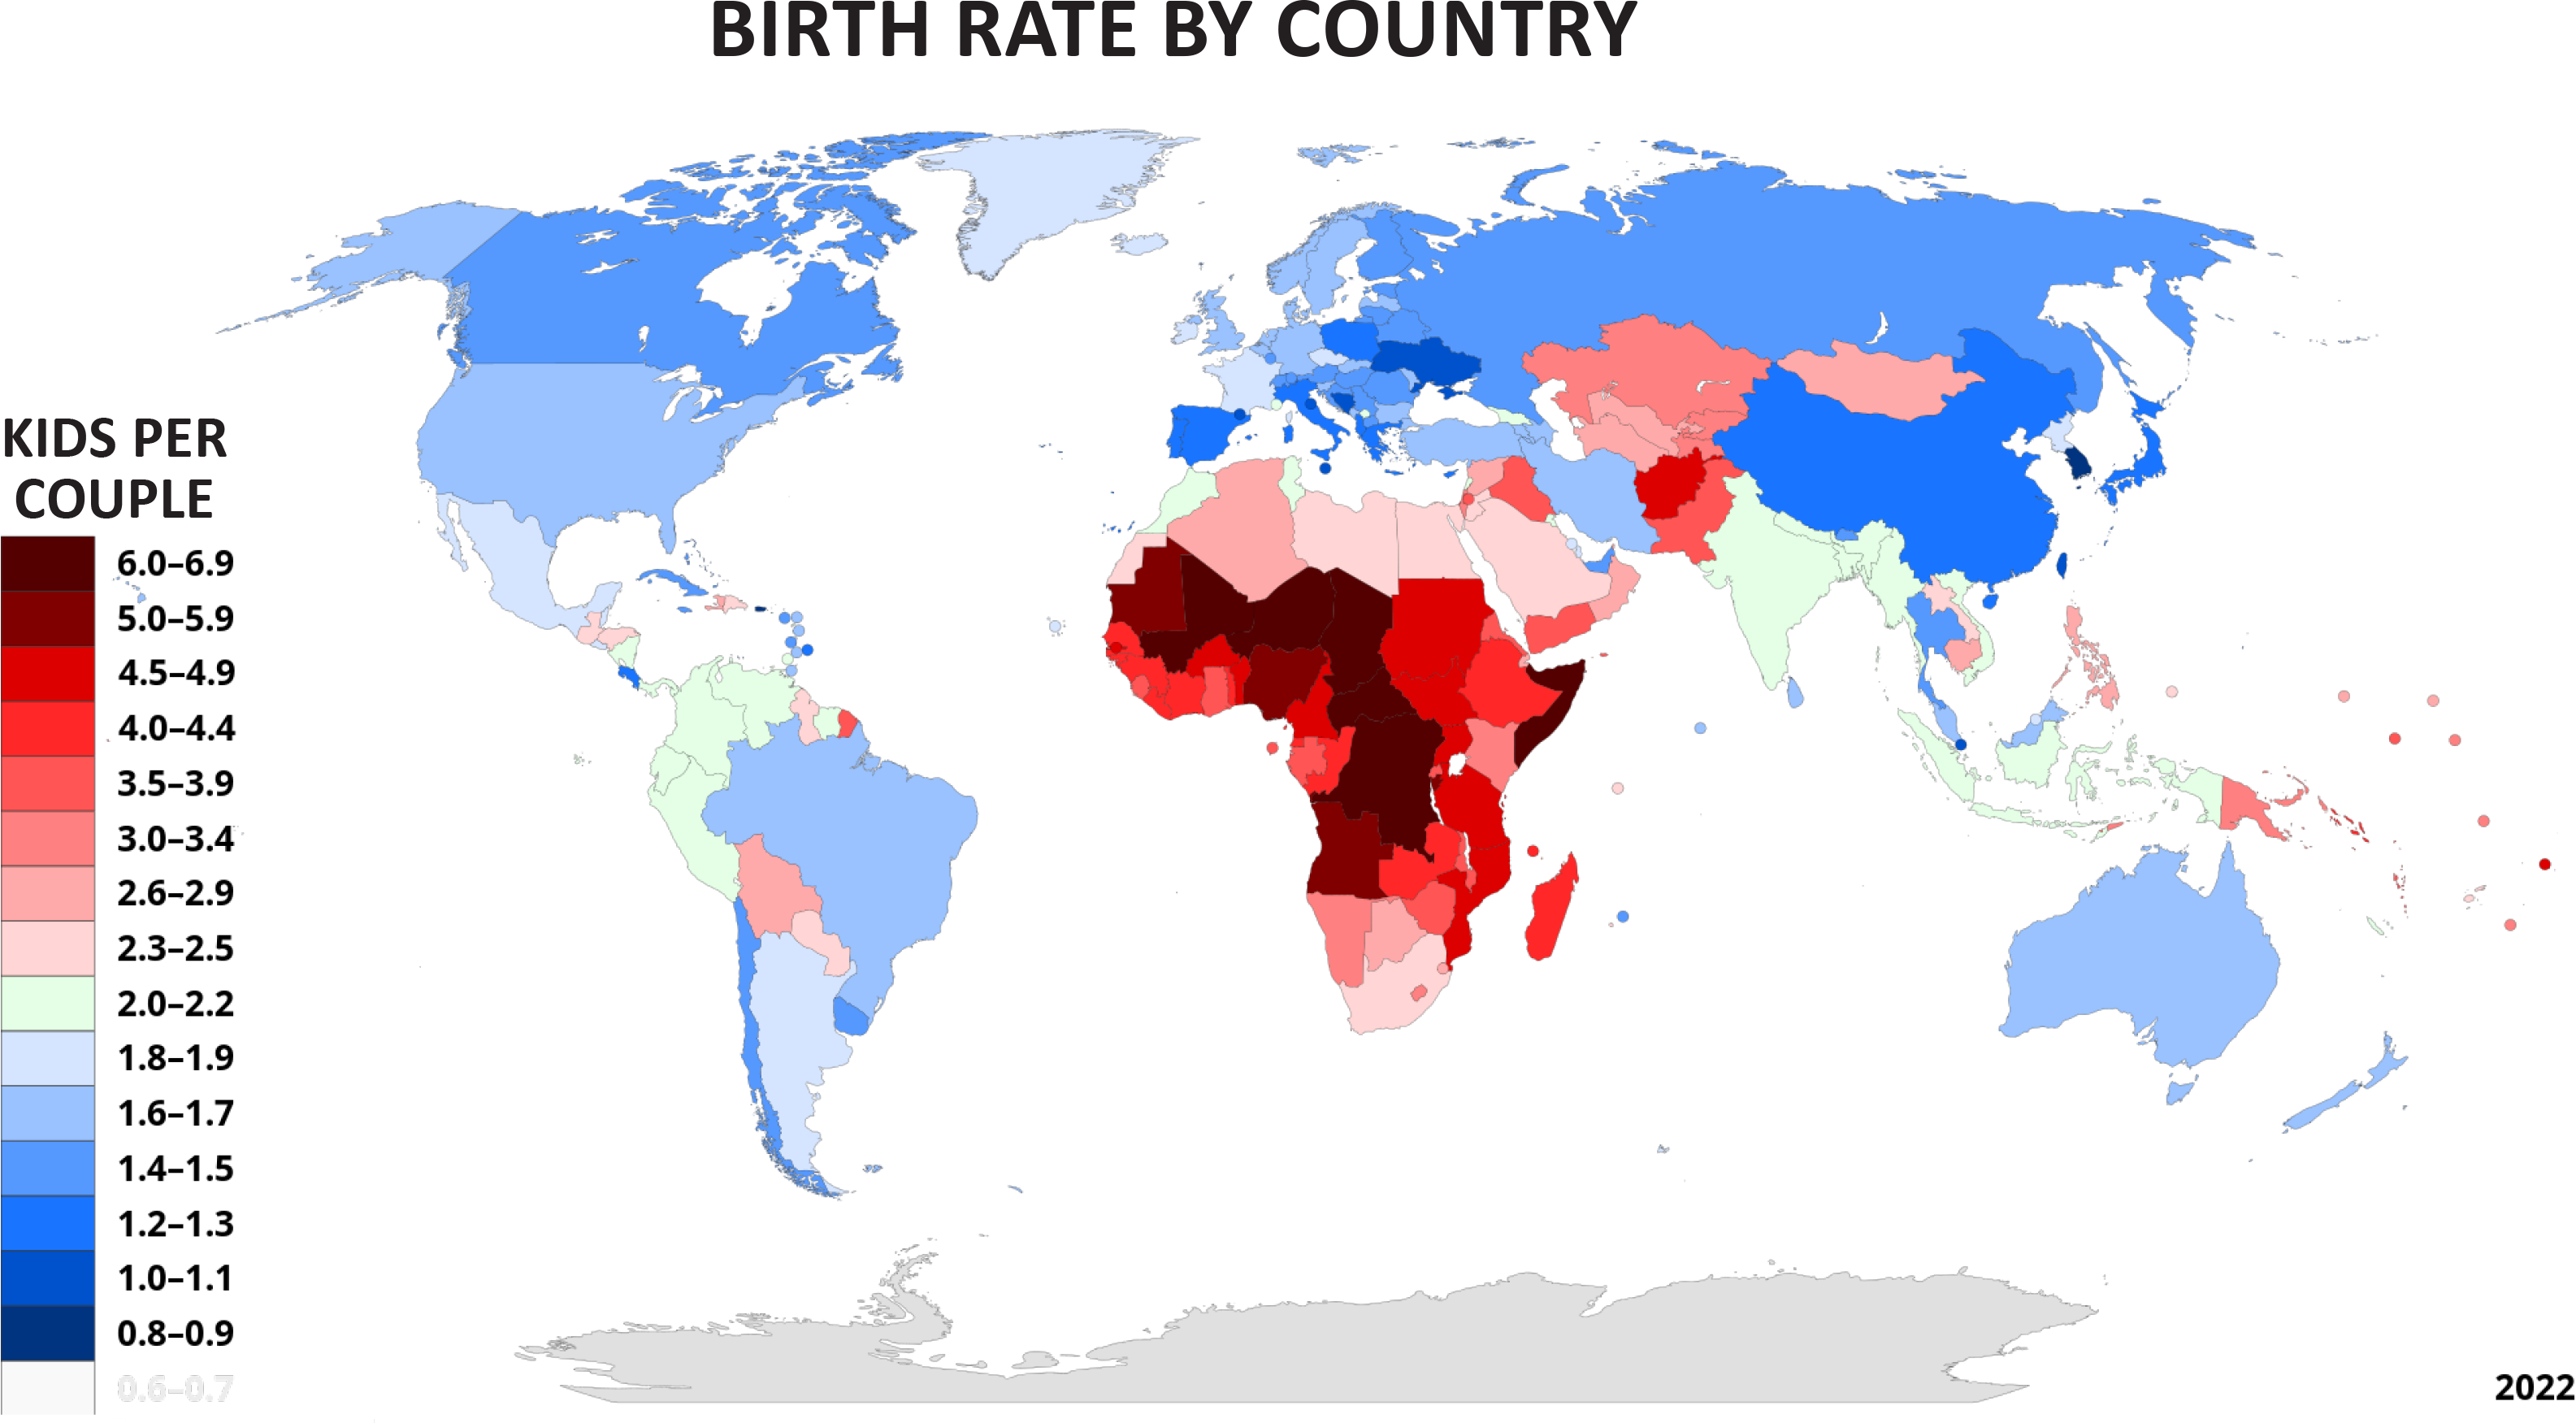 1 Birthrate by country